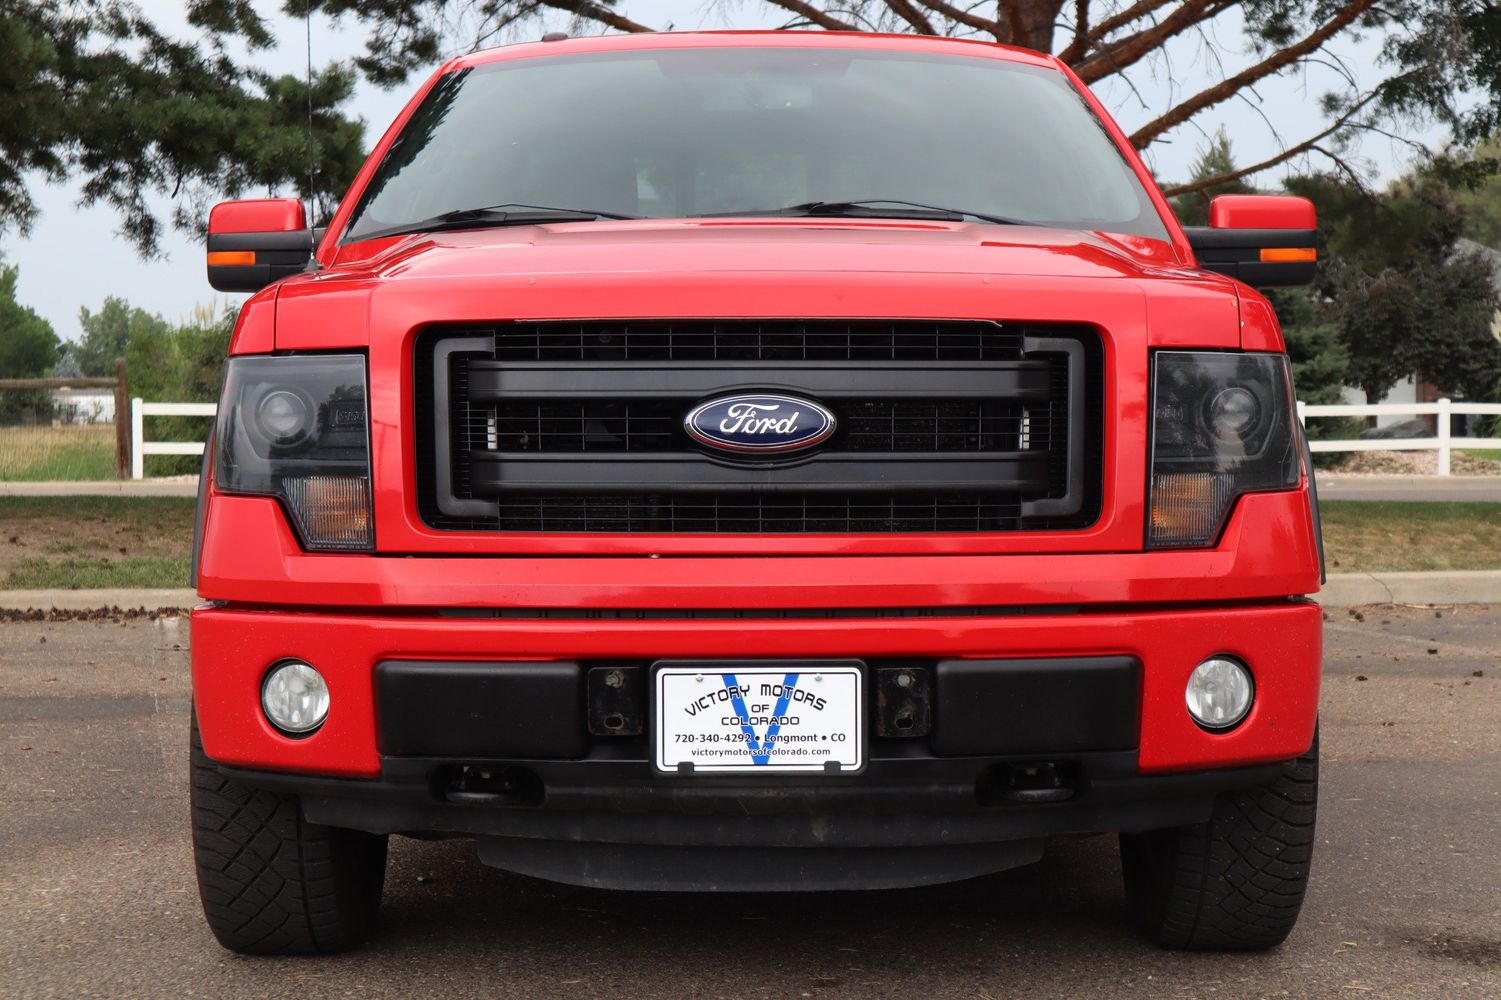 2013 Ford F-150 FX4 | Victory Motors of Colorado 2013 Ford F 150 Fx4 5.0 Towing Capacity